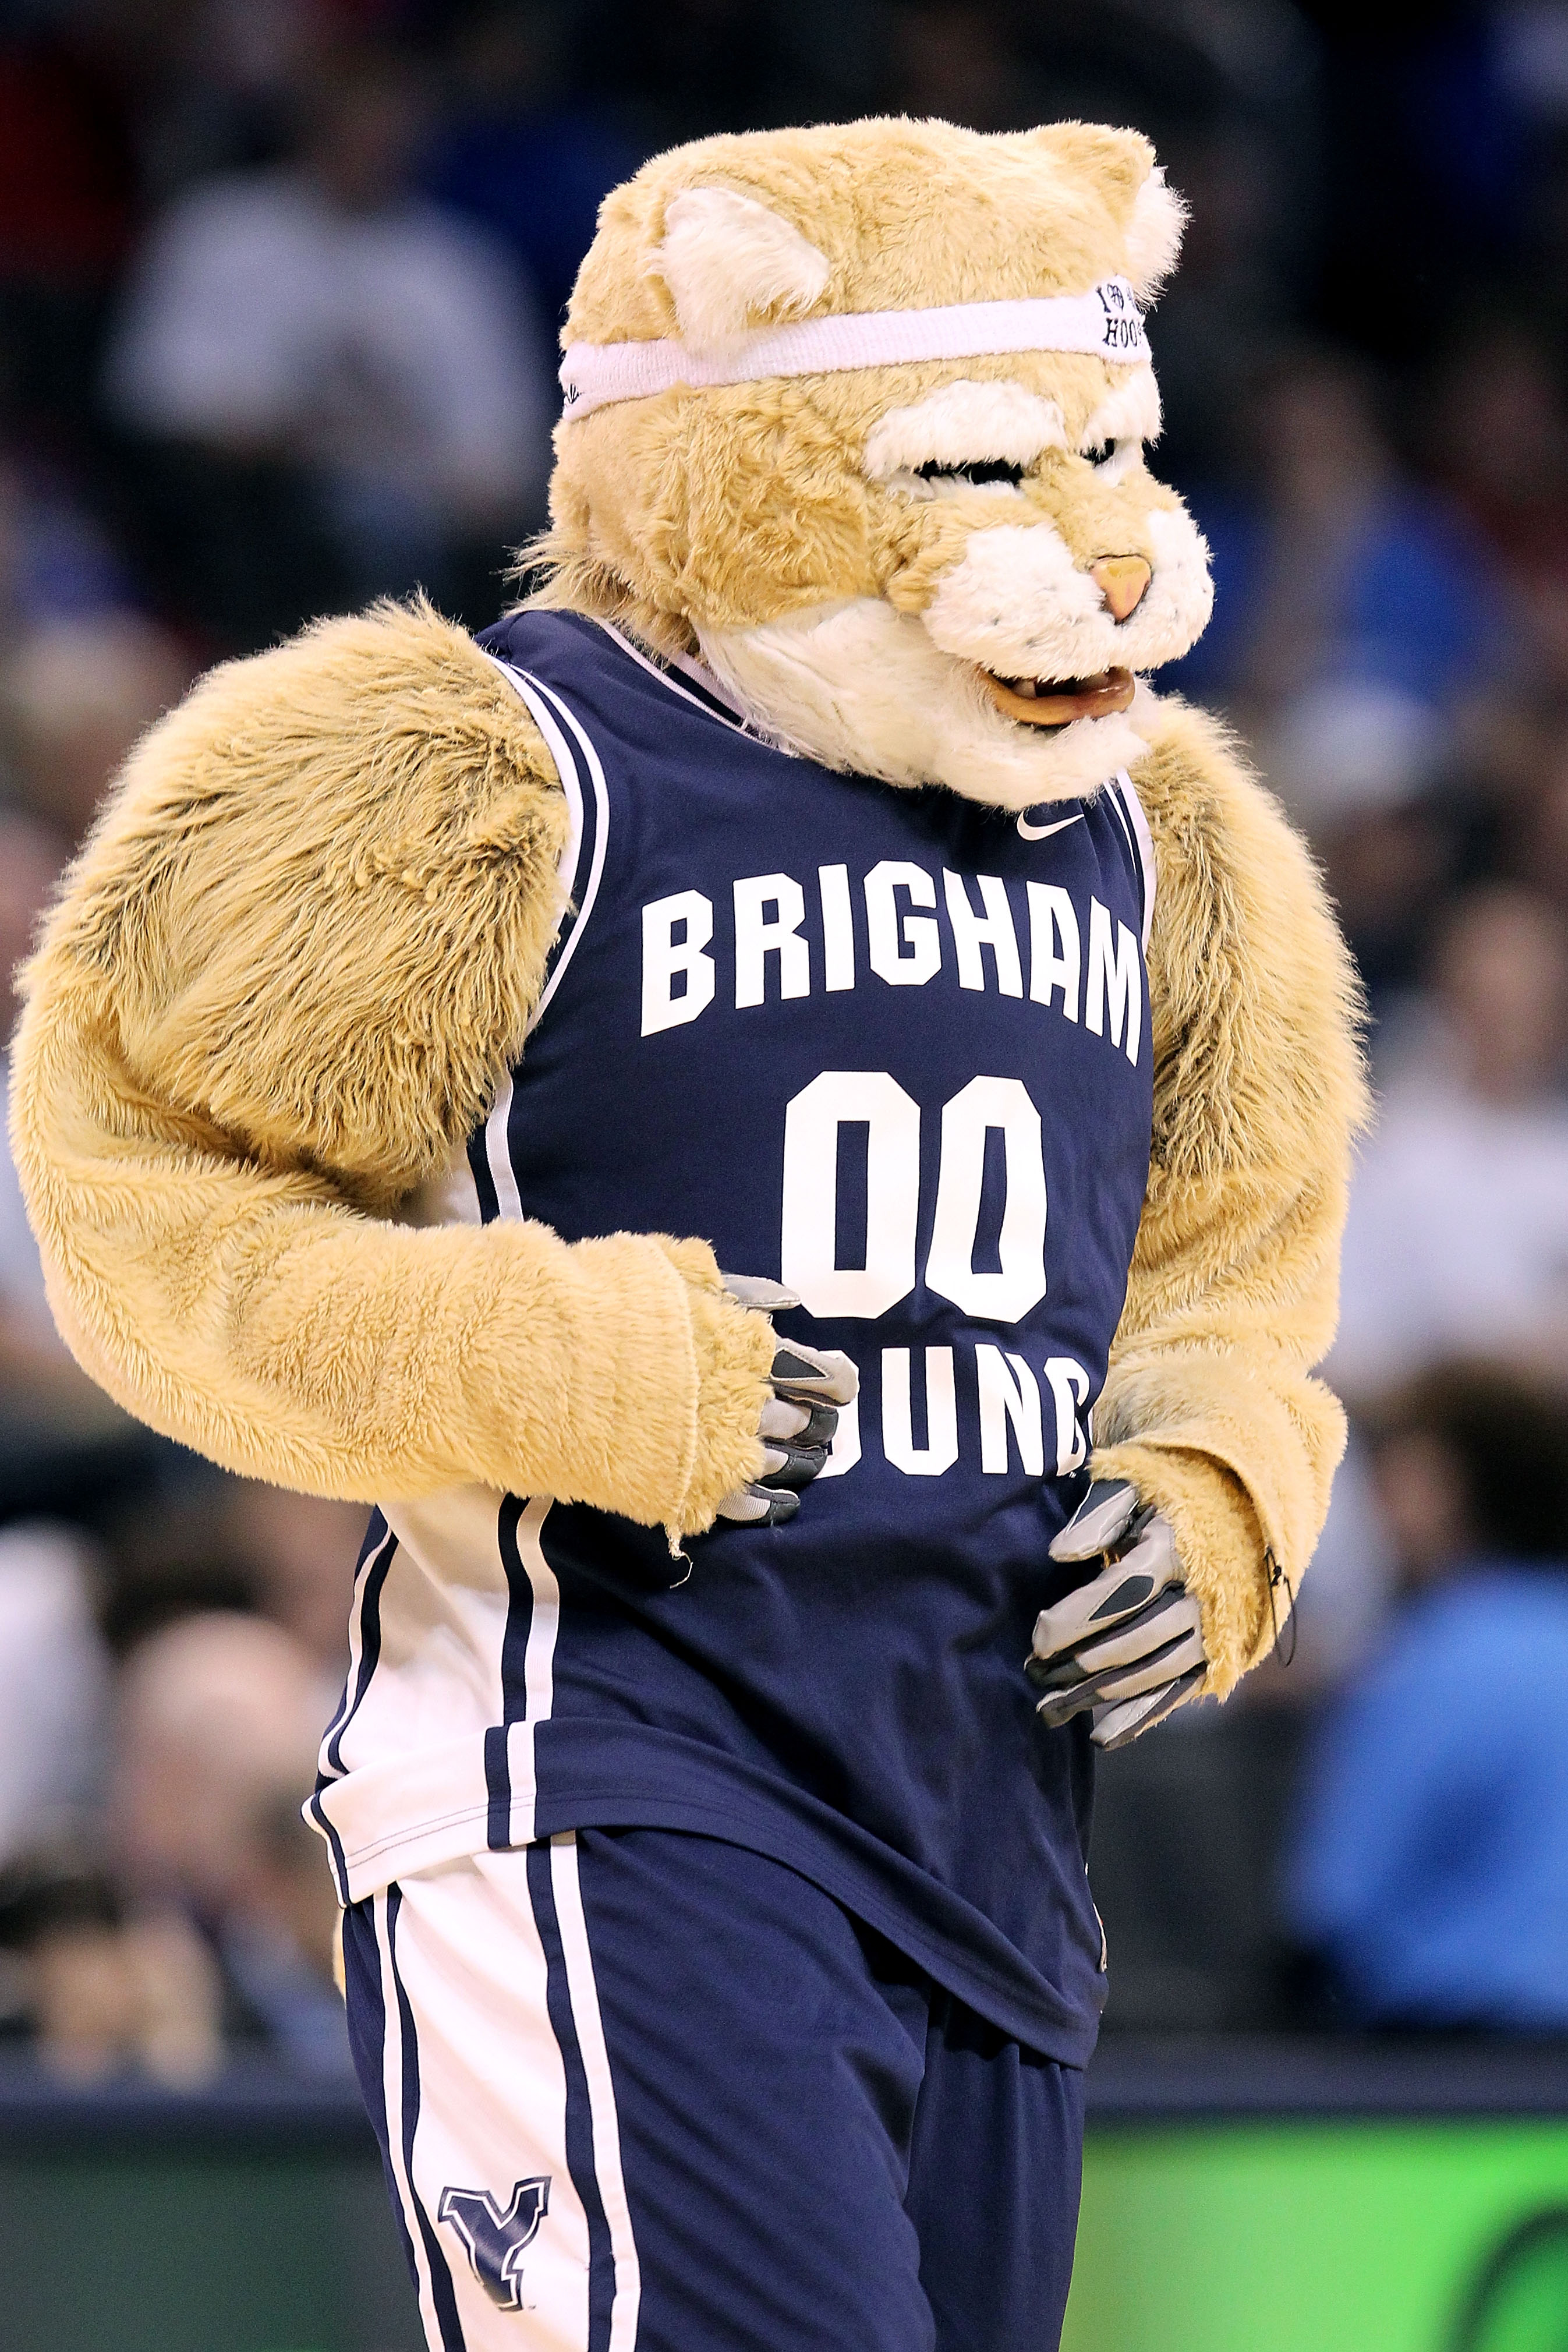 OKLAHOMA CITY - MARCH 18:  Cosmo the mascot of the BYU Cougars performs against the Florida Gators during the first round of the 2010 NCAA men�s basketball tournament at Ford Center on March 18, 2010 in Oklahoma City, Oklahoma.  (Photo by Ronald Martinez/